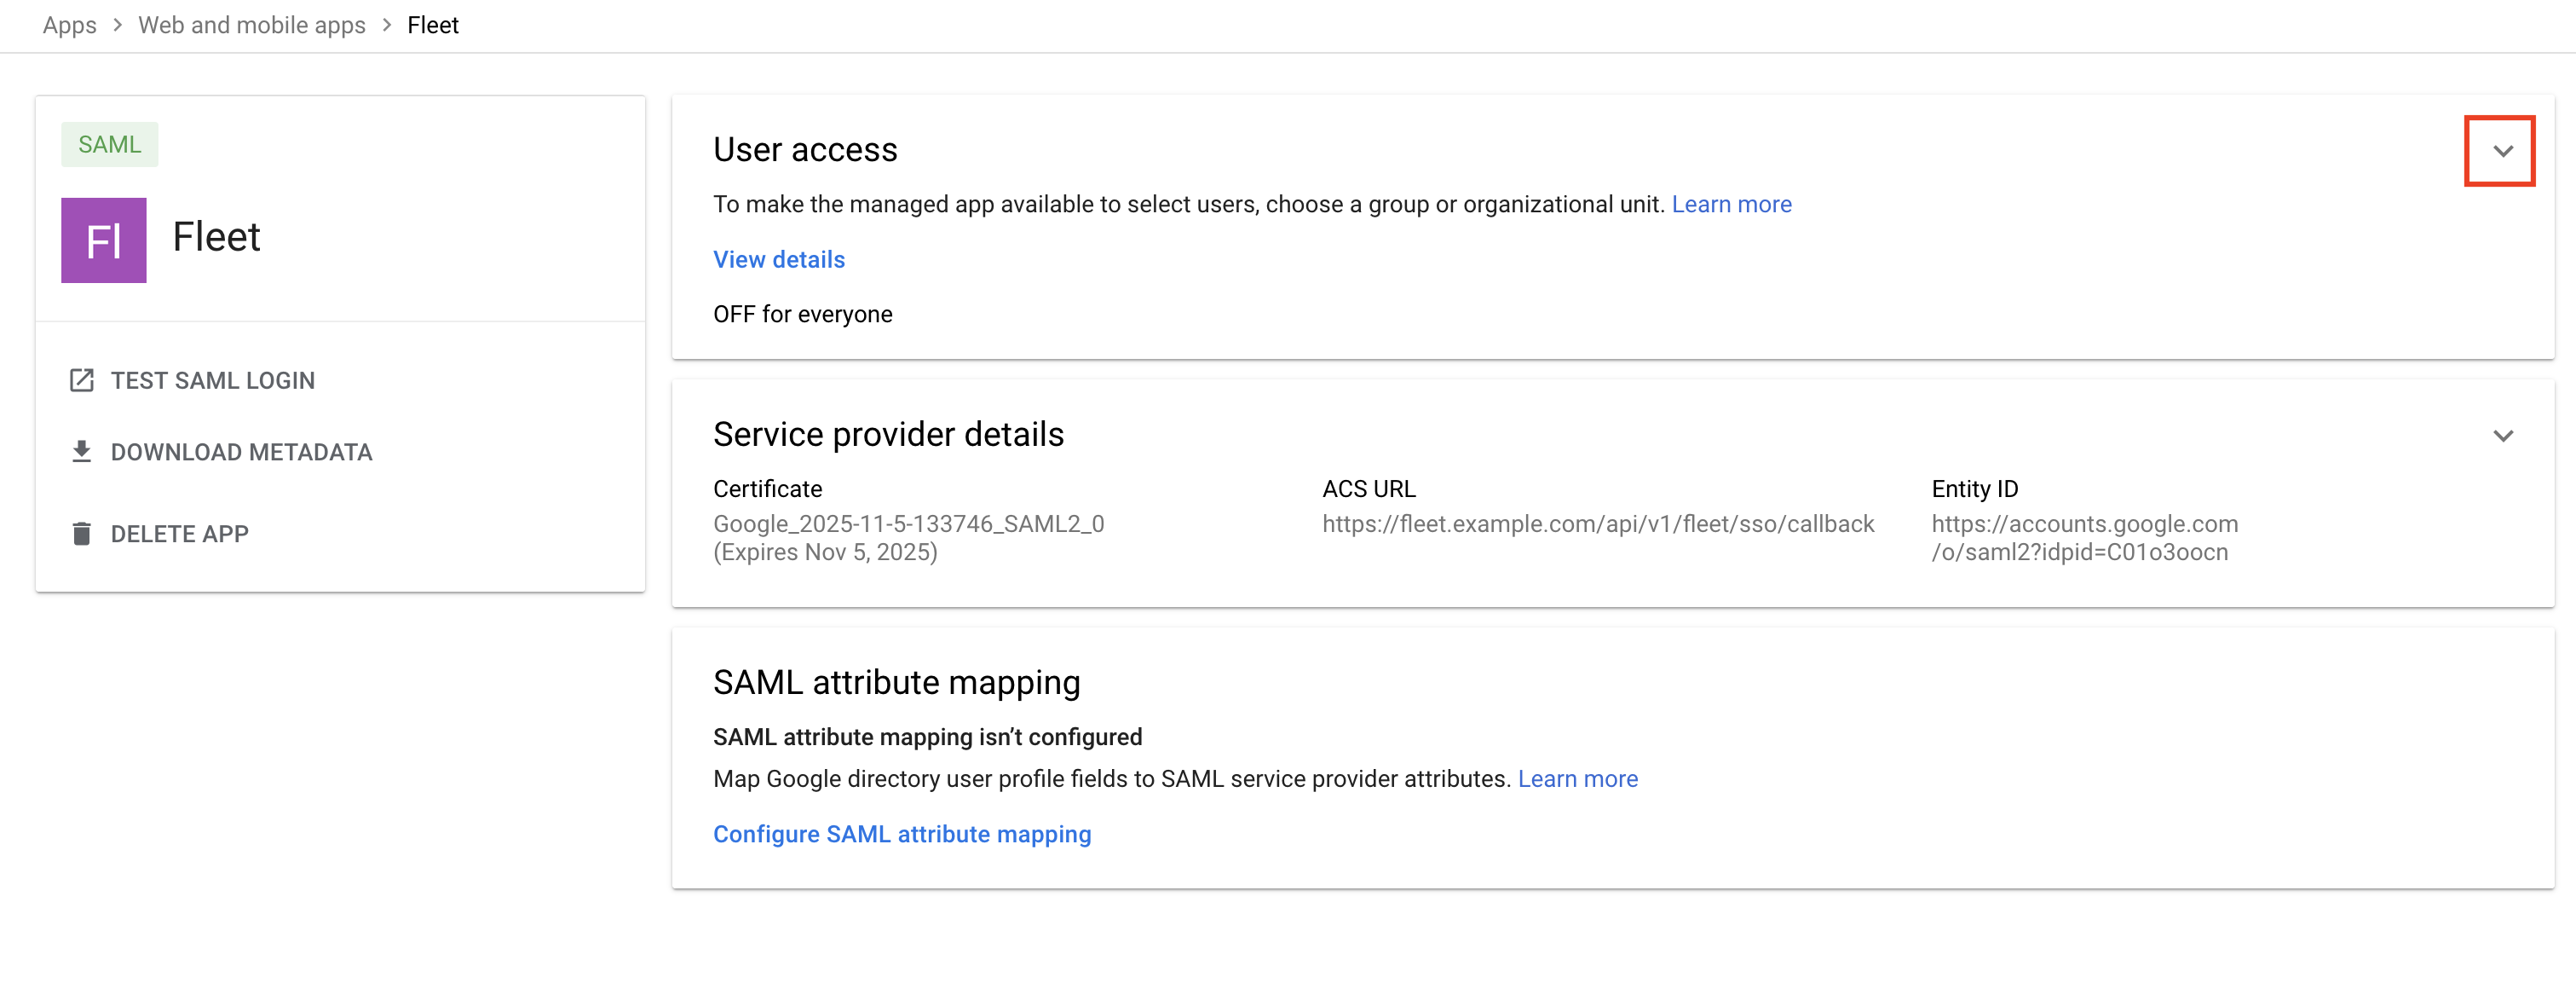 The new SAML app's details page in Google Workspace